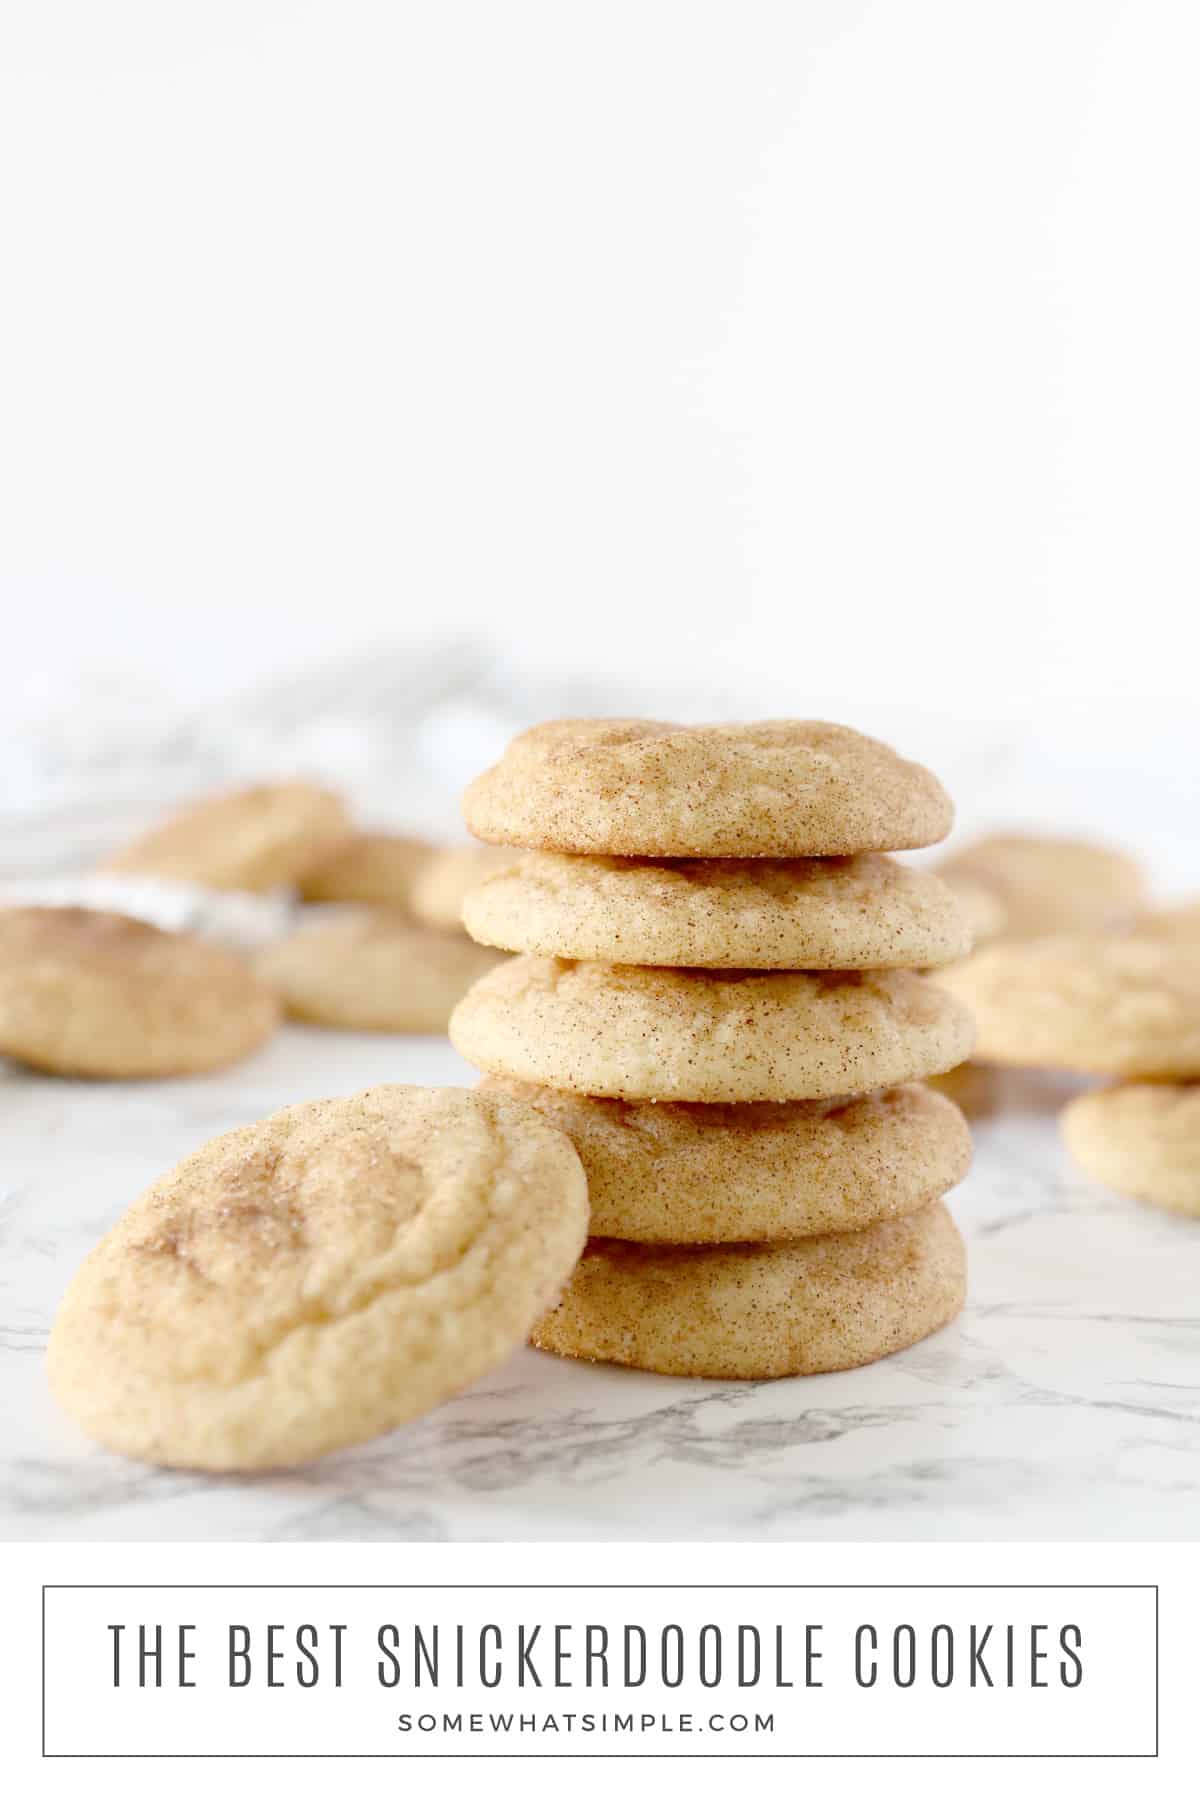 This easy snickerdoodle recipe is simple to make, and the result is a soft, delicious snickerdoodle cookie that turns out great every time! via @somewhatsimple